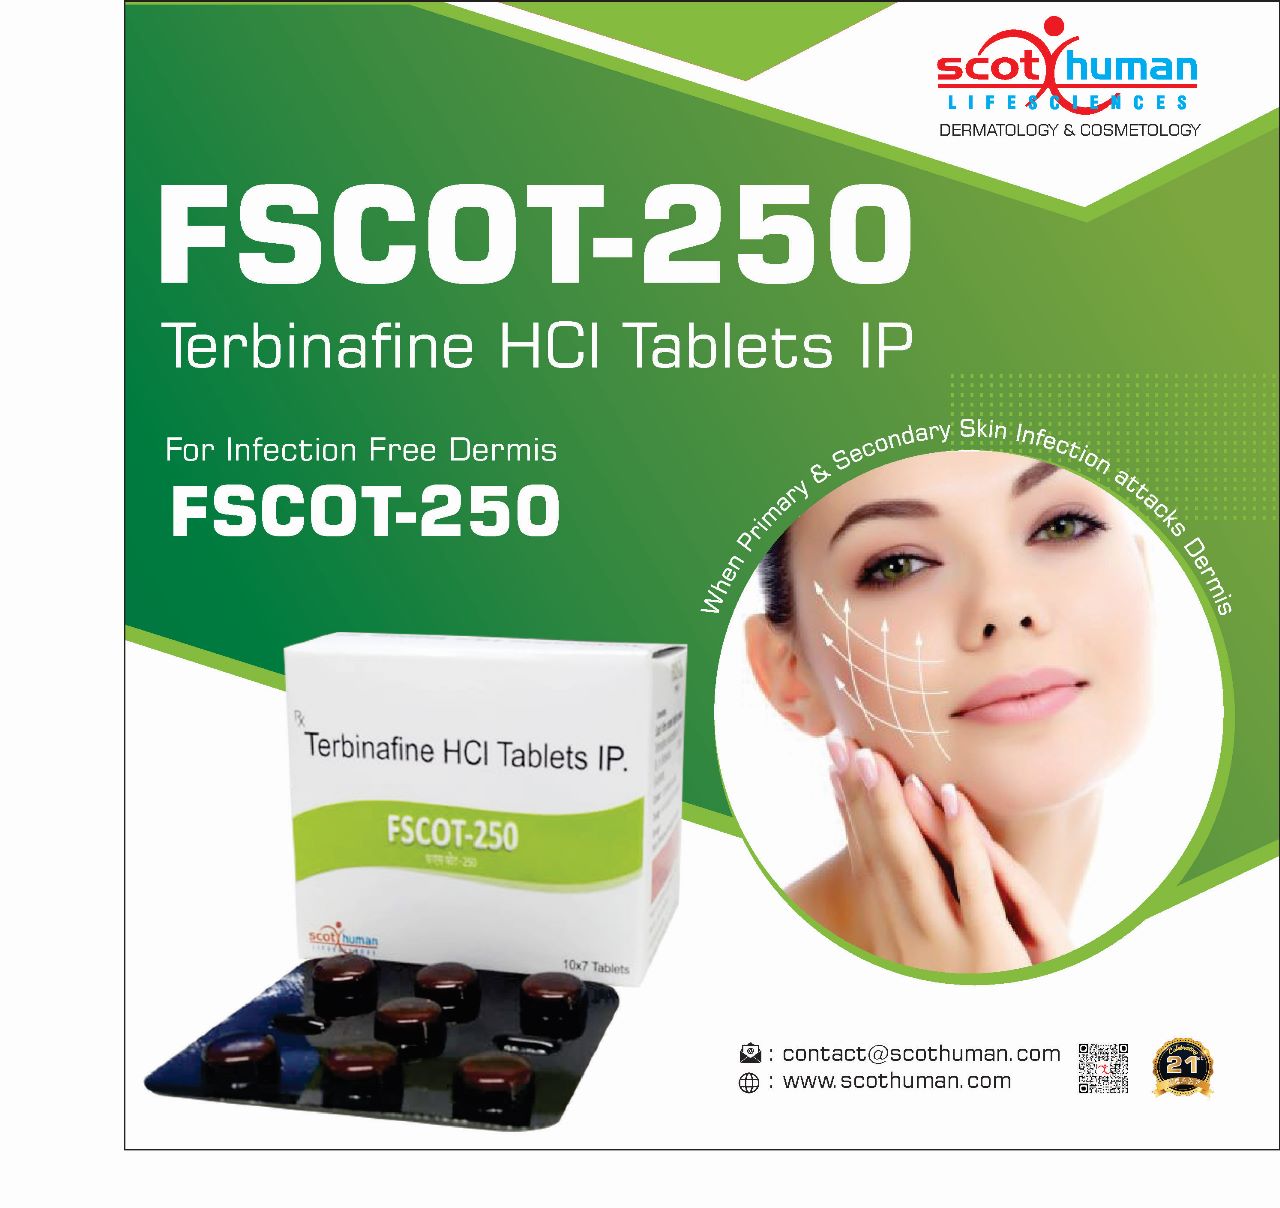 Product Name: Fscot 250, Compositions of Fscot 250 are Terbinafine HCL Tablets IP - Pharma Drugs and Chemicals